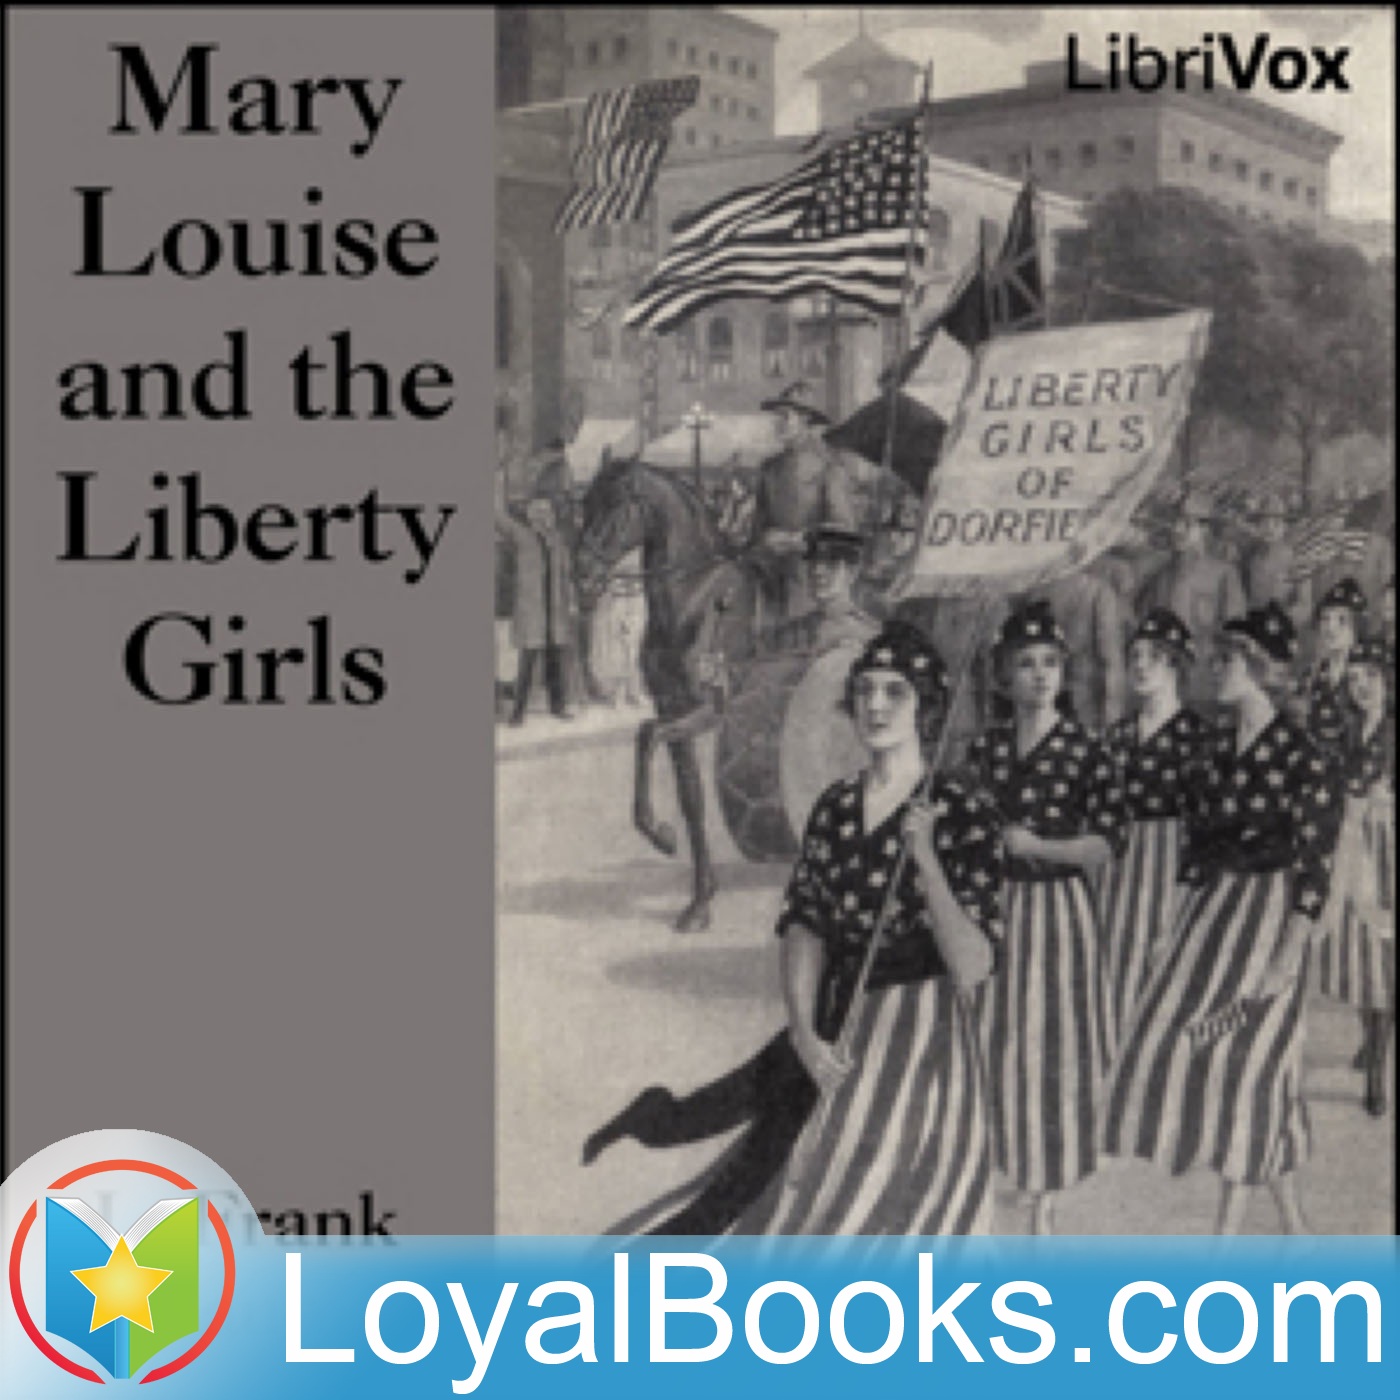 Mary Louise and the Liberty Girls by L. Frank Baum